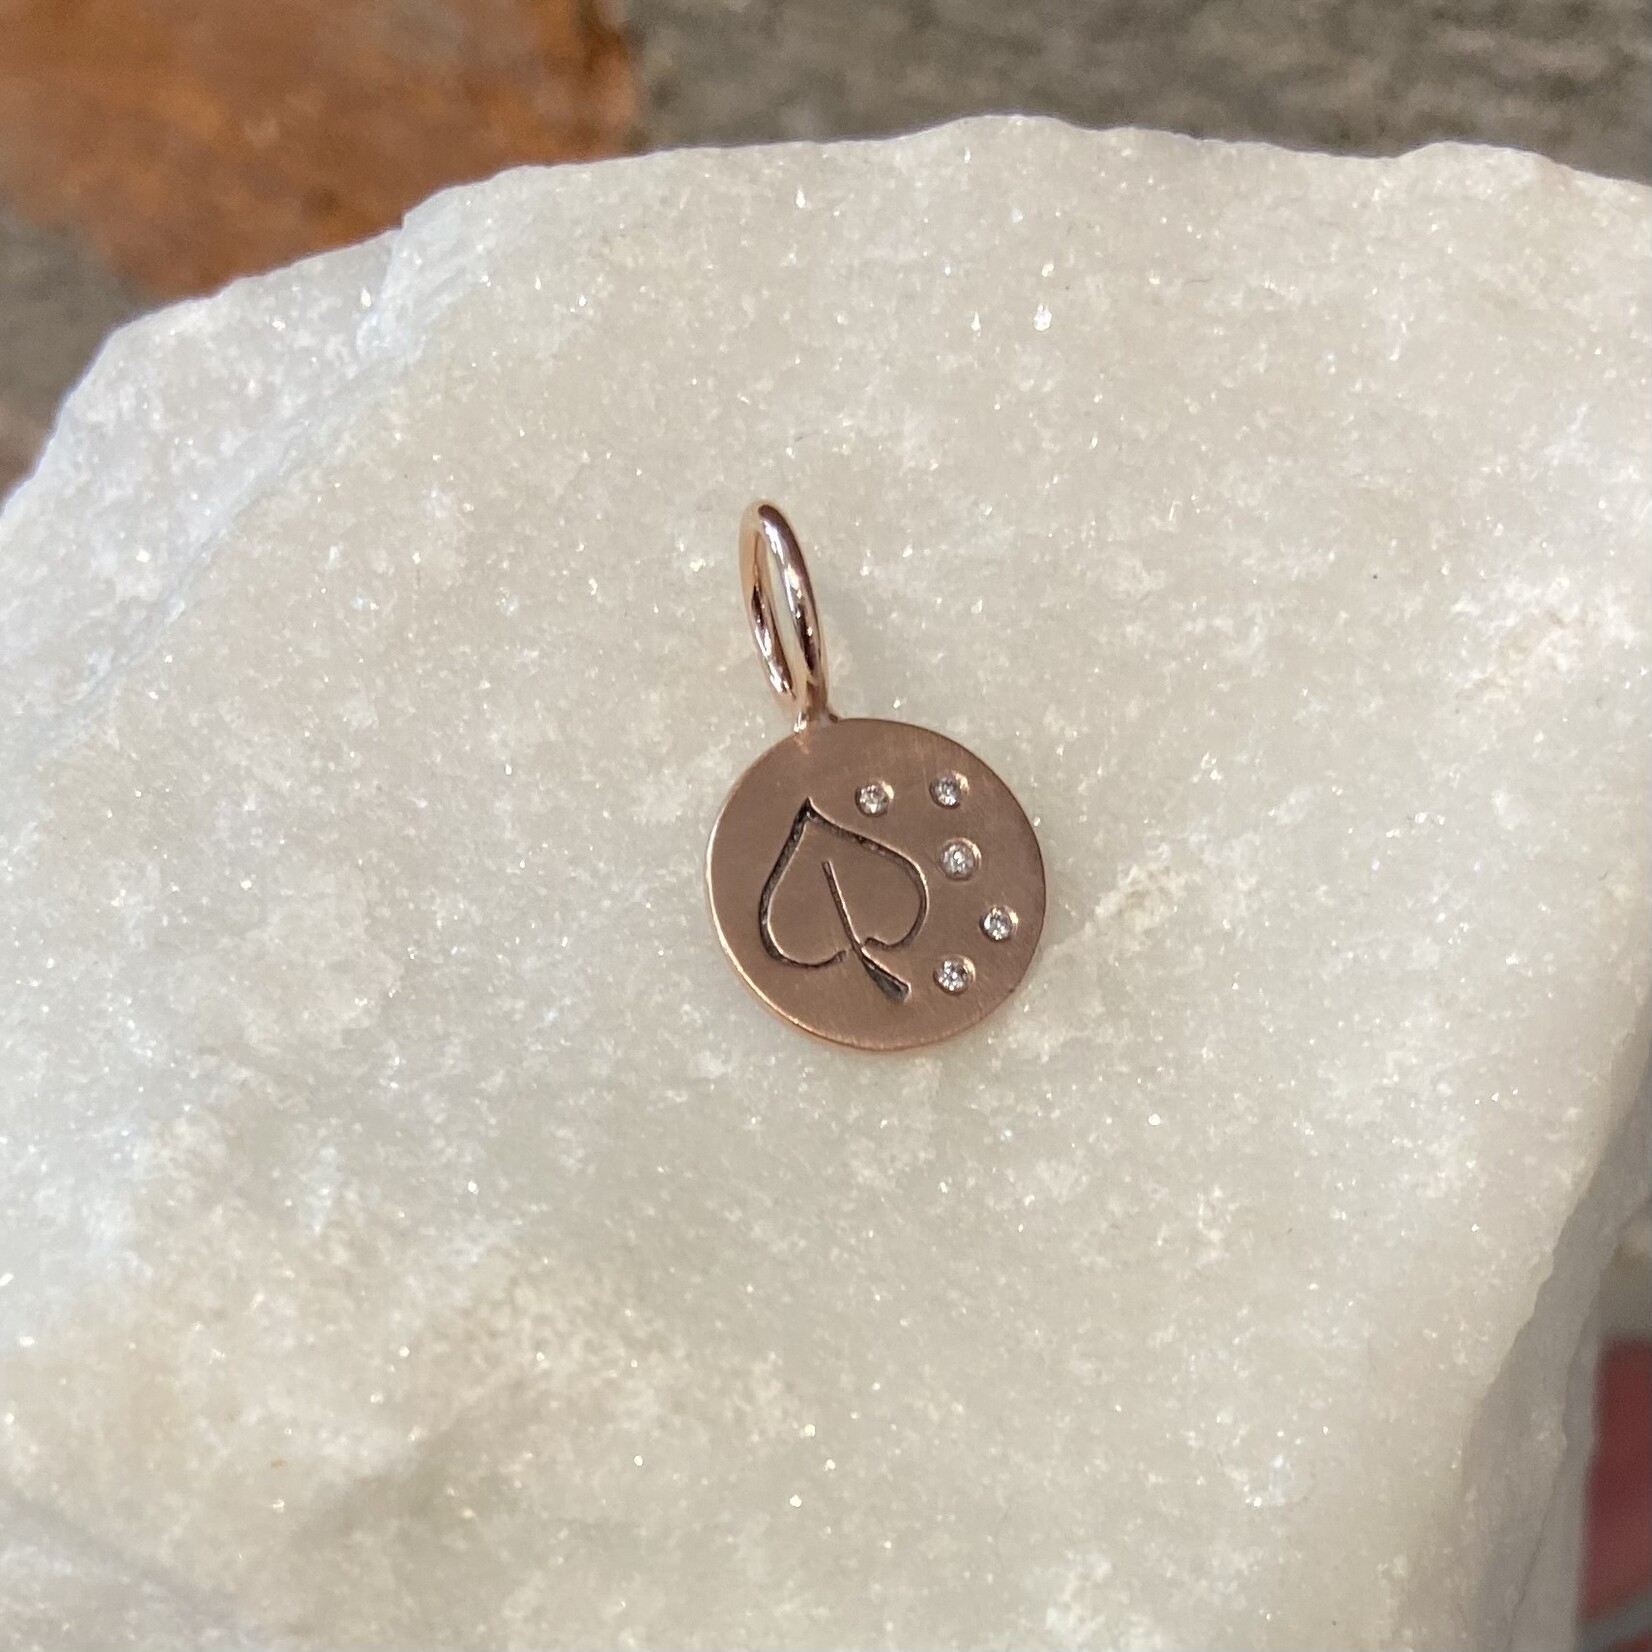 Heather Moore Custom Aspen Leaf Hand-Stamped on Mini Rose Gold Round Charm with Diamonds